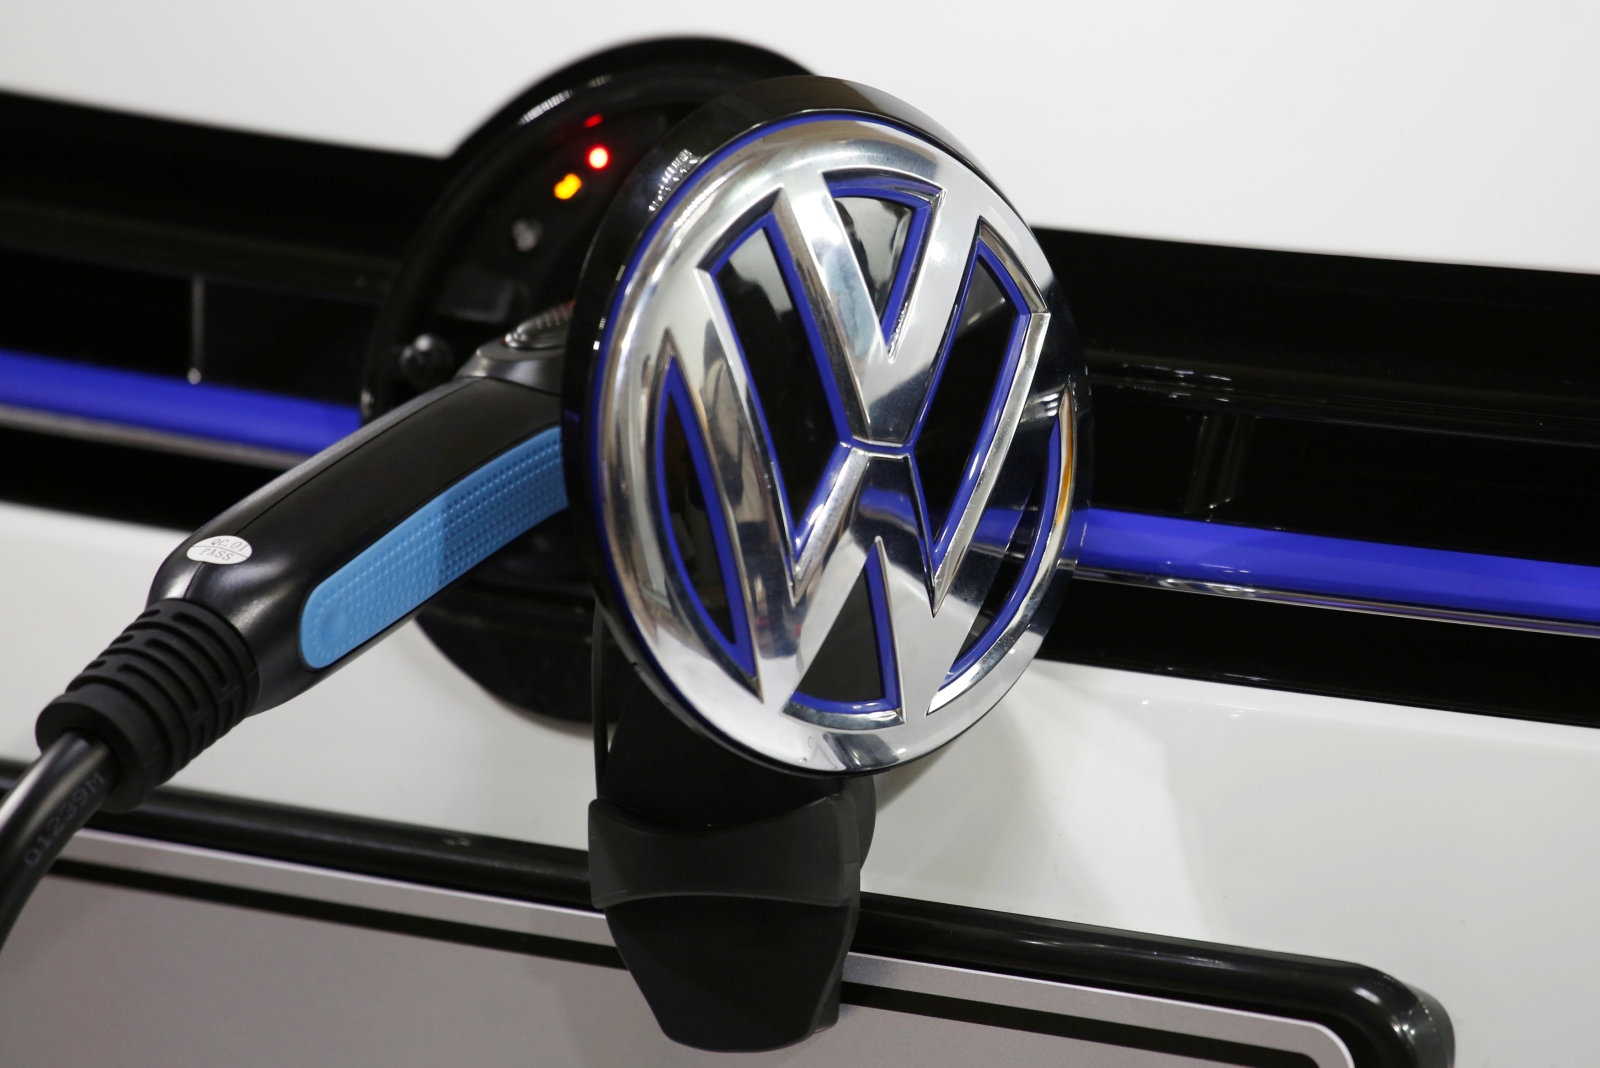 Volkswagen plans 2,800 EV charging stations in the US by 2019 | DeviceDaily.com